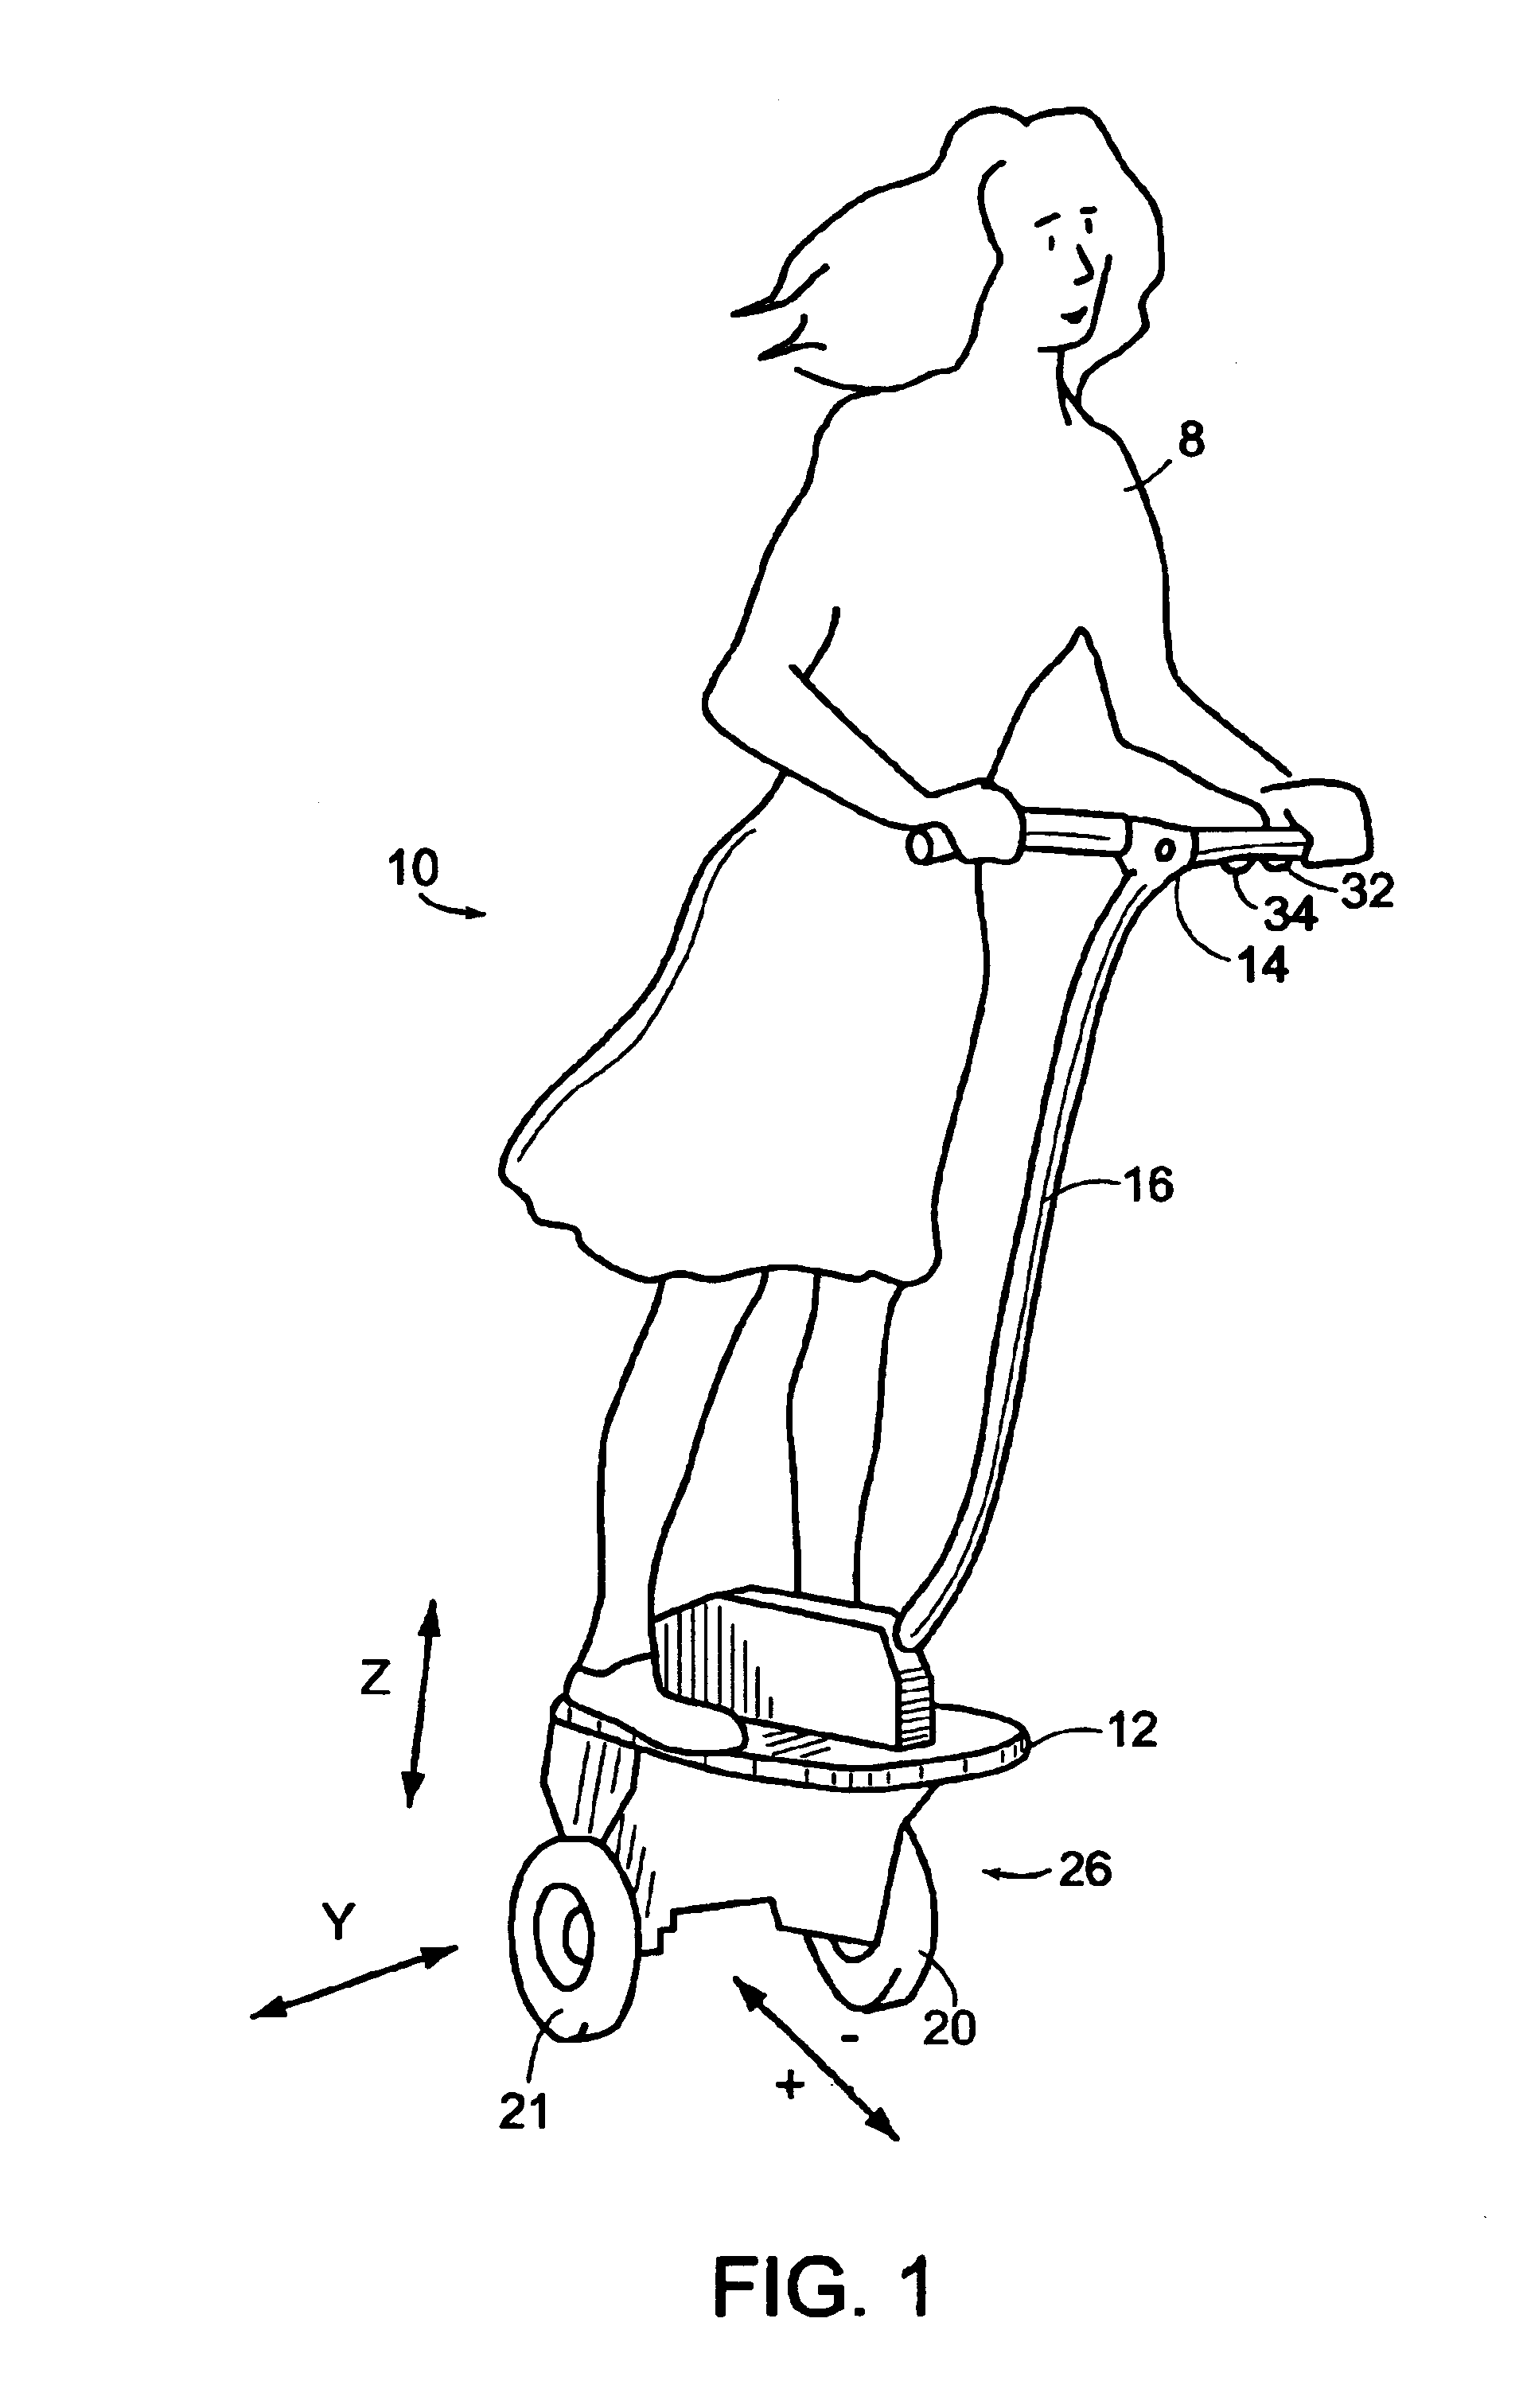 Exercise mode for a personal transporter device